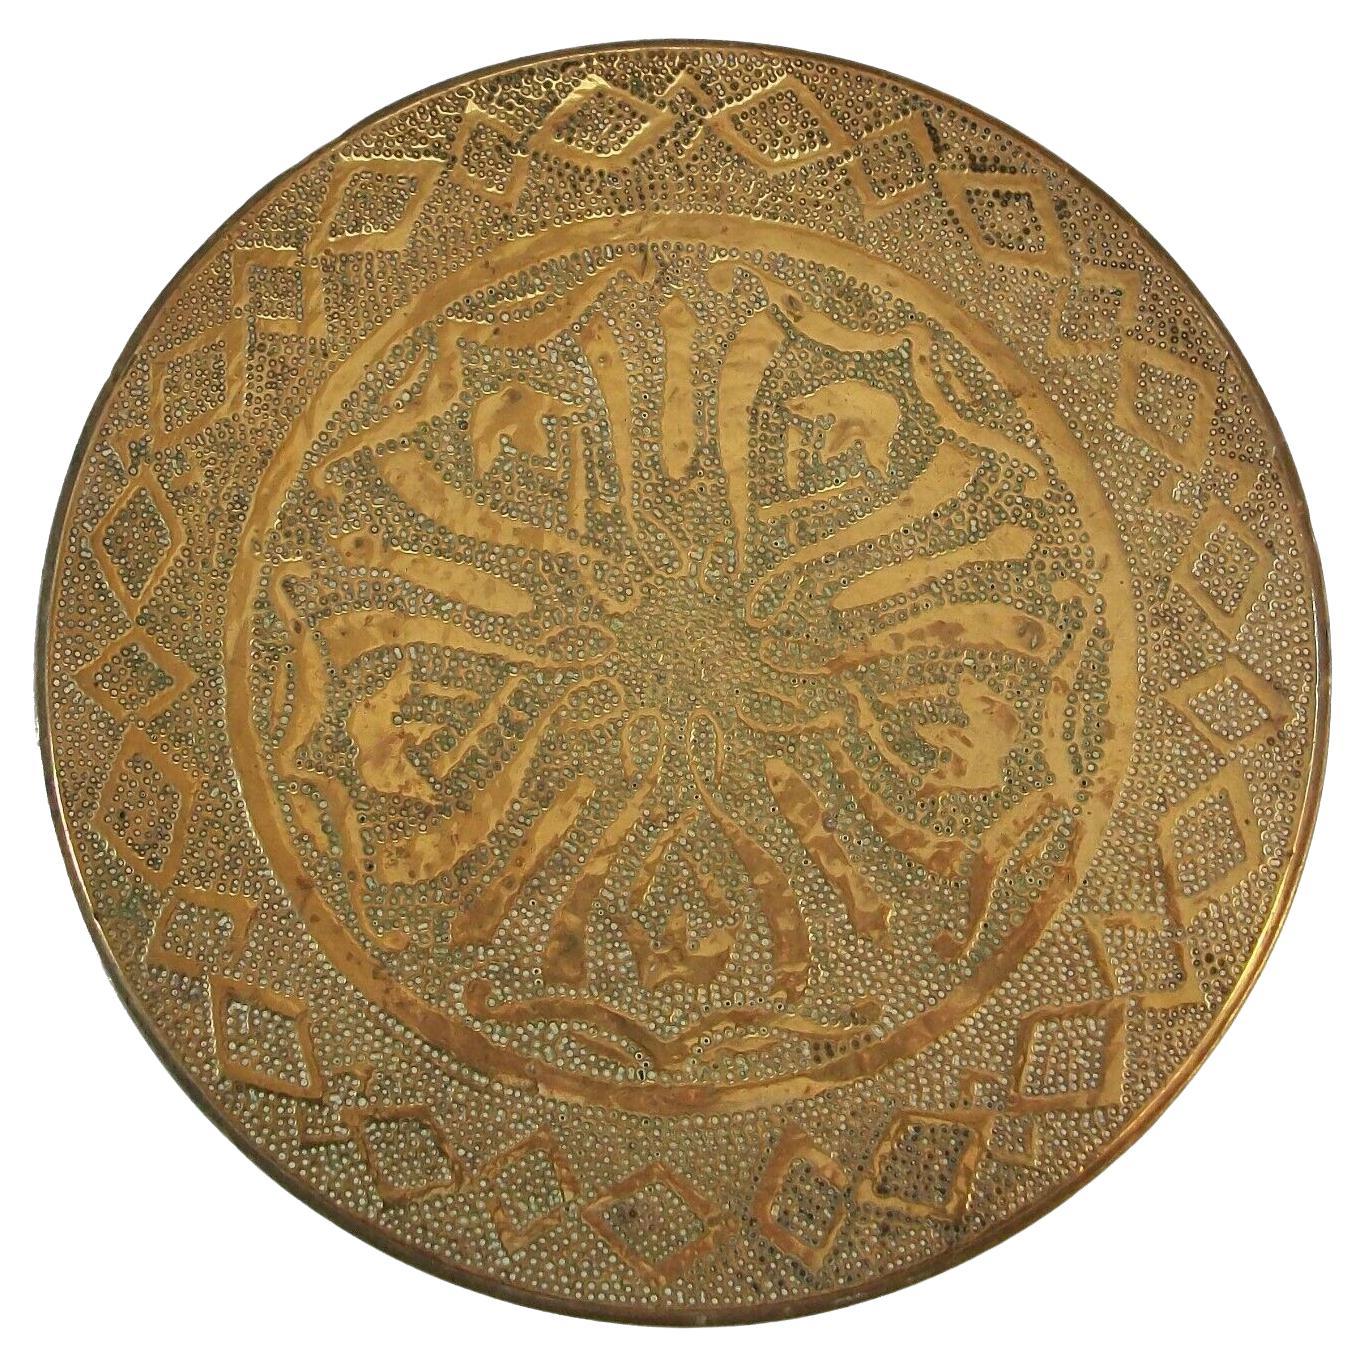 Antique Brass Needle Embossed Trivet with Tulips, United States, Circa 1910